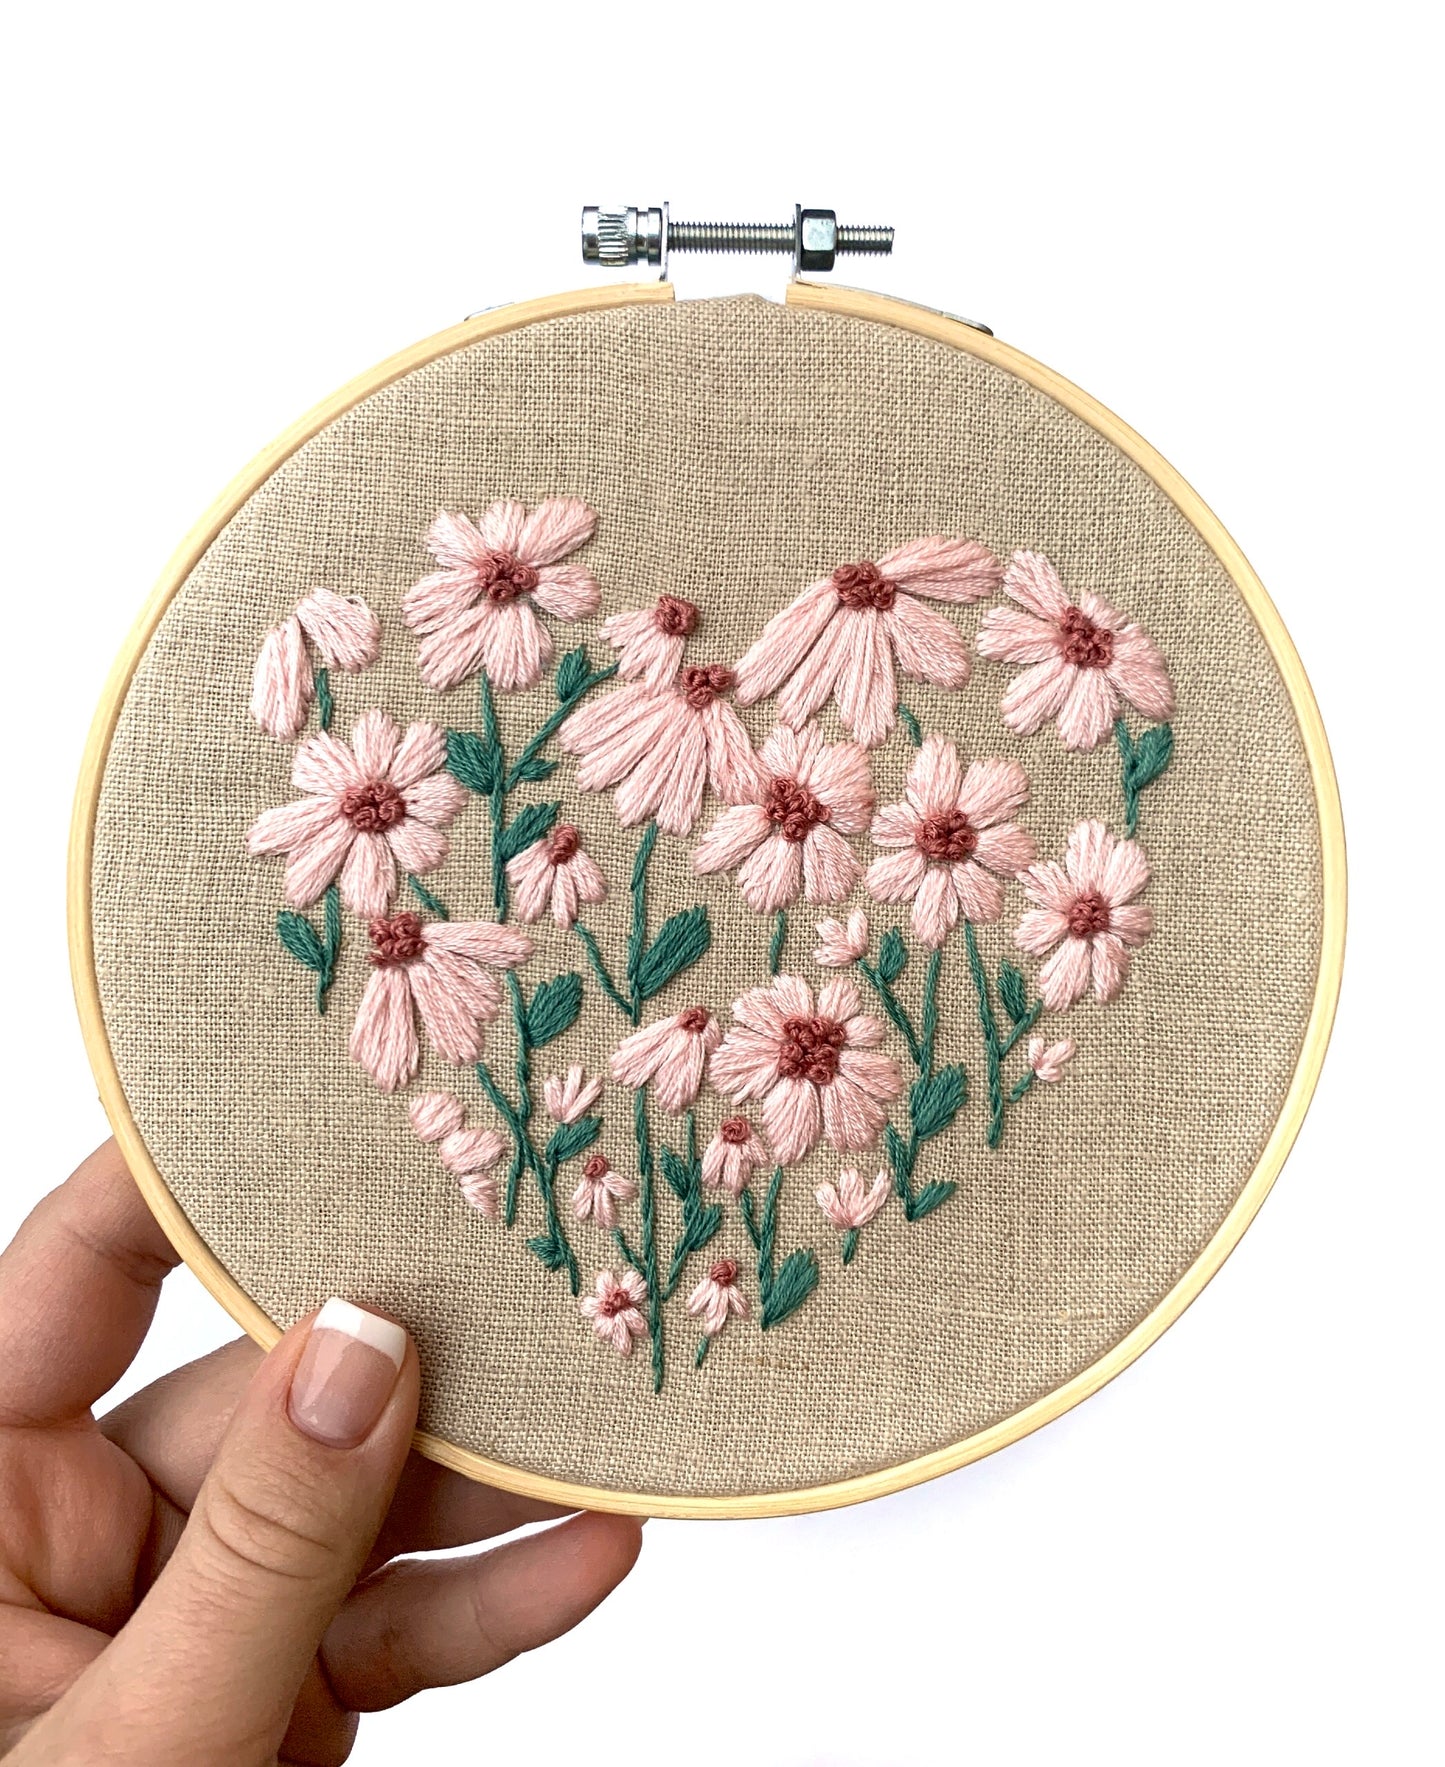 Floral Heart Embroidery Kit